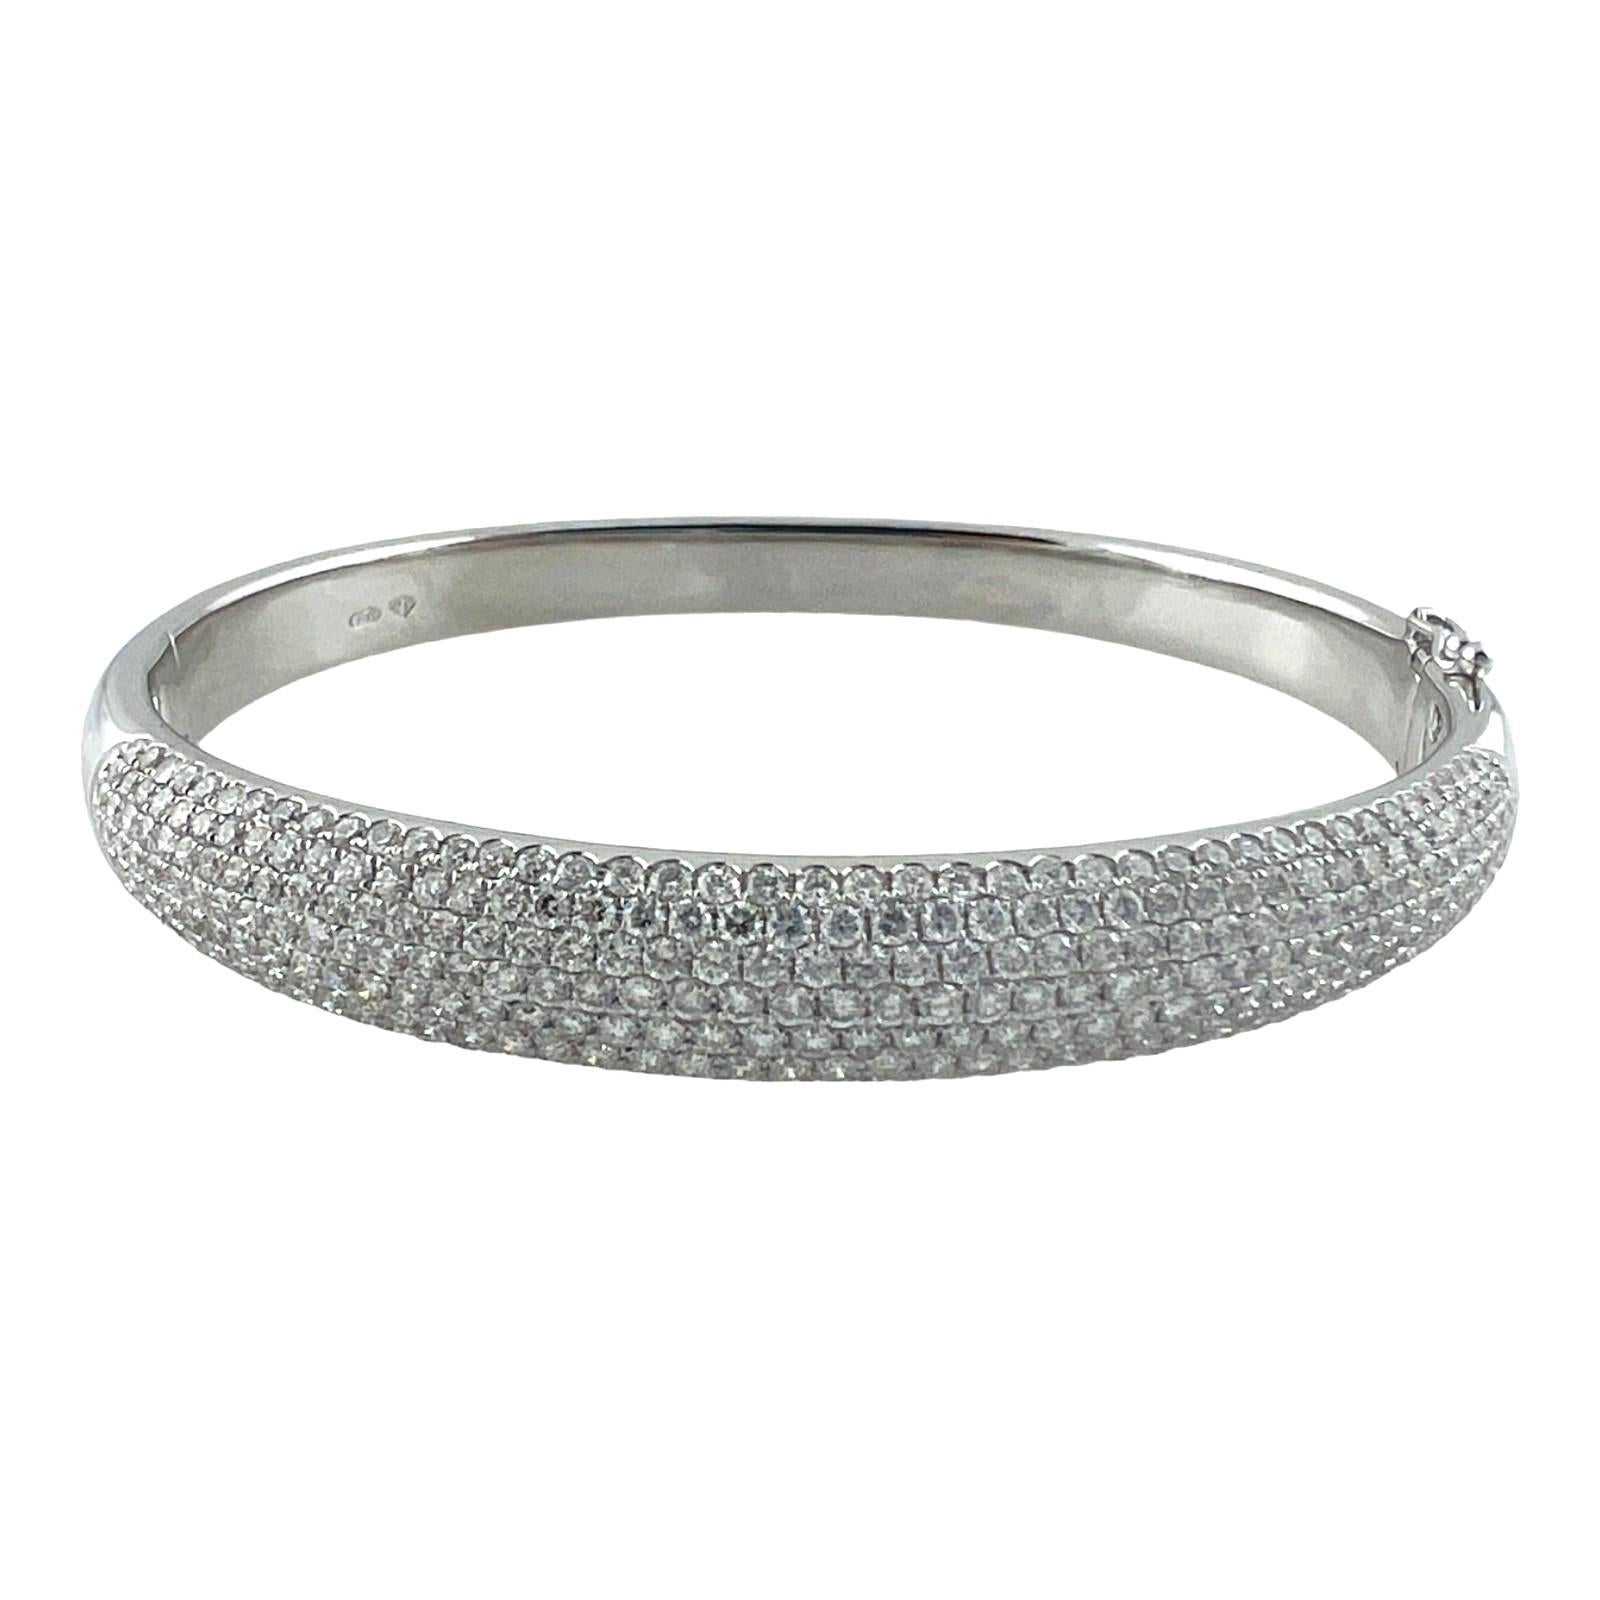 Vintage 18 Karat White Gold Diamond Bangle 

This beautiful diamond bangle bracelet is full of sparkle, set with over 300 round brilliant diamonds

Total diamond weight is approx. 4.0 cts. 

Diamond Color - G - H

Diamond Clarity: VS1/VS2 

This